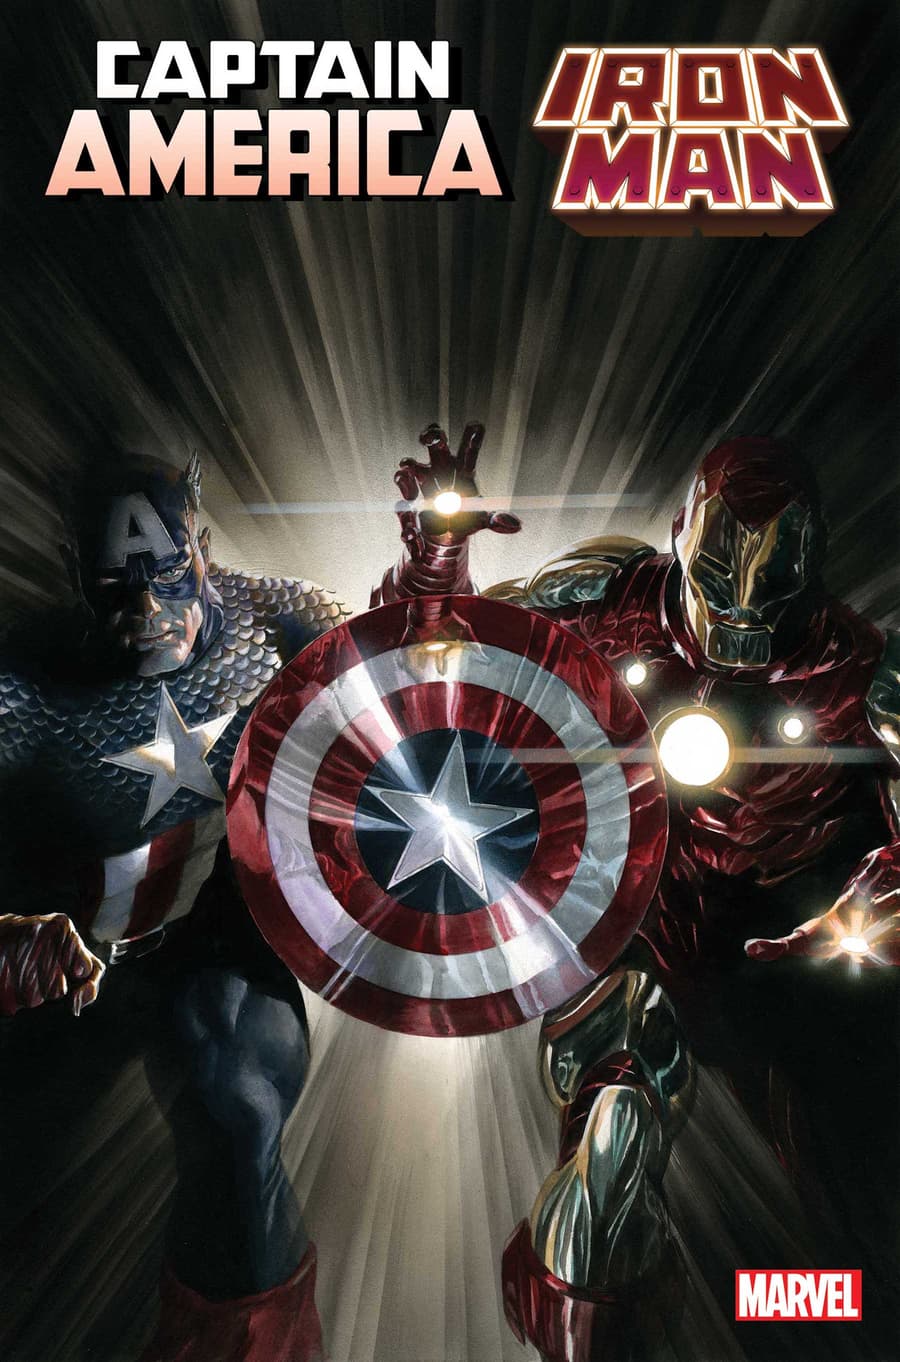 CAPTAIN AMERICA/IRON MAN #1 cover by Alex Ross